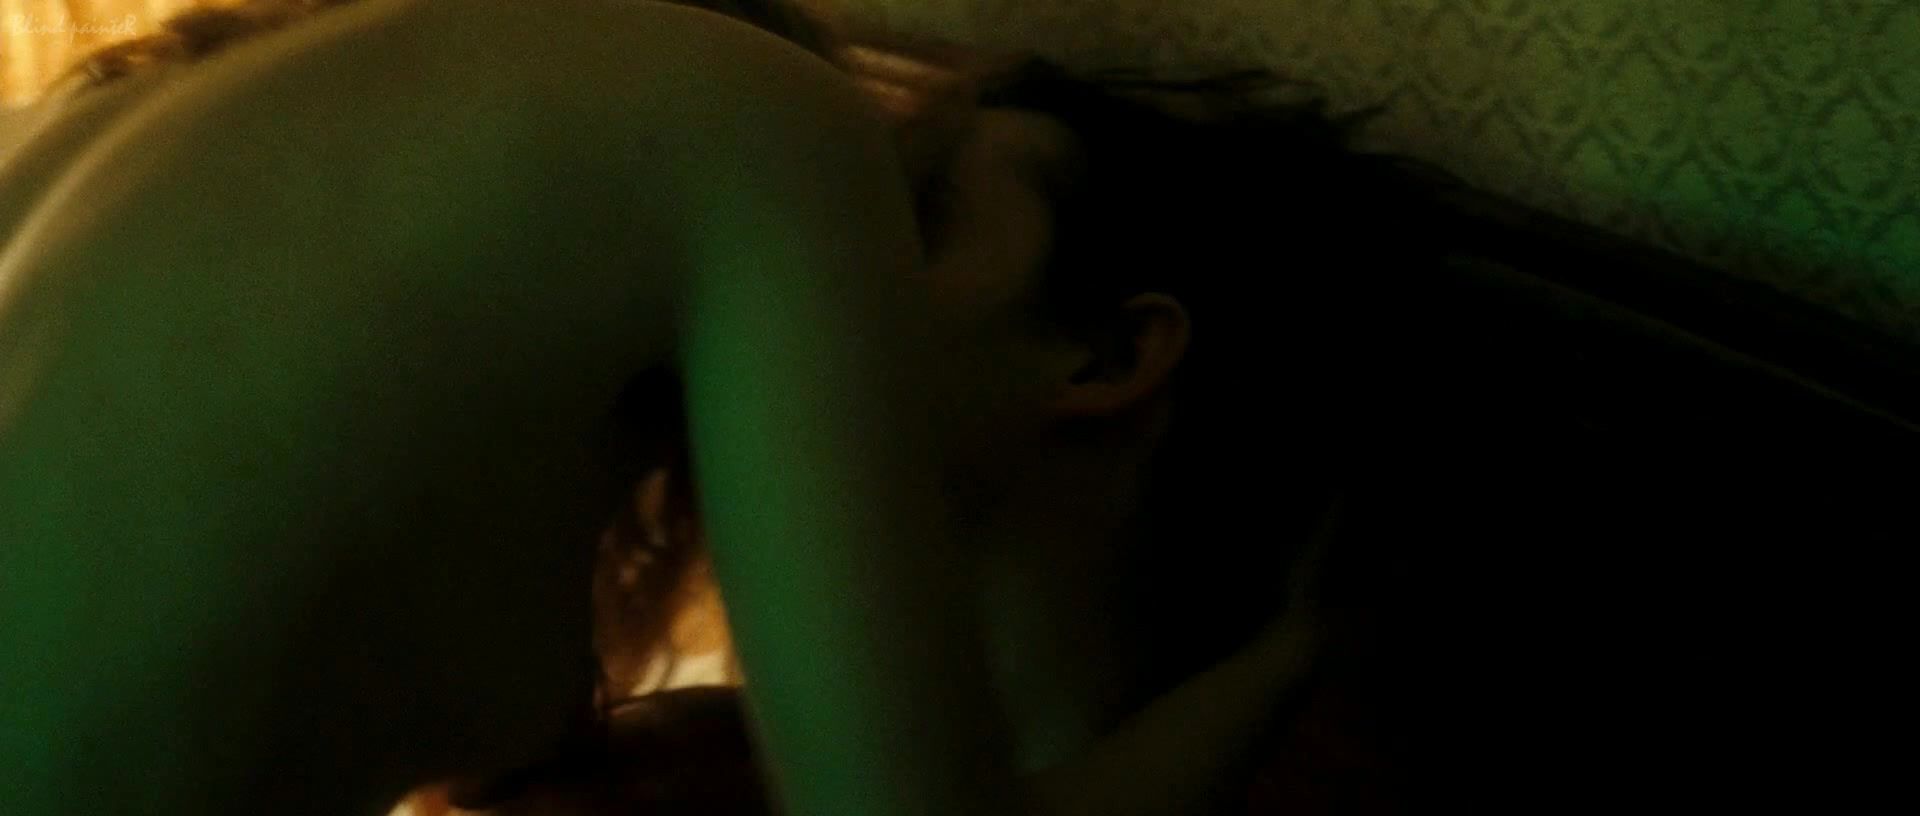 Rough Sex Kristen Stewart nude - On The Road S1E1 DaPink - 1